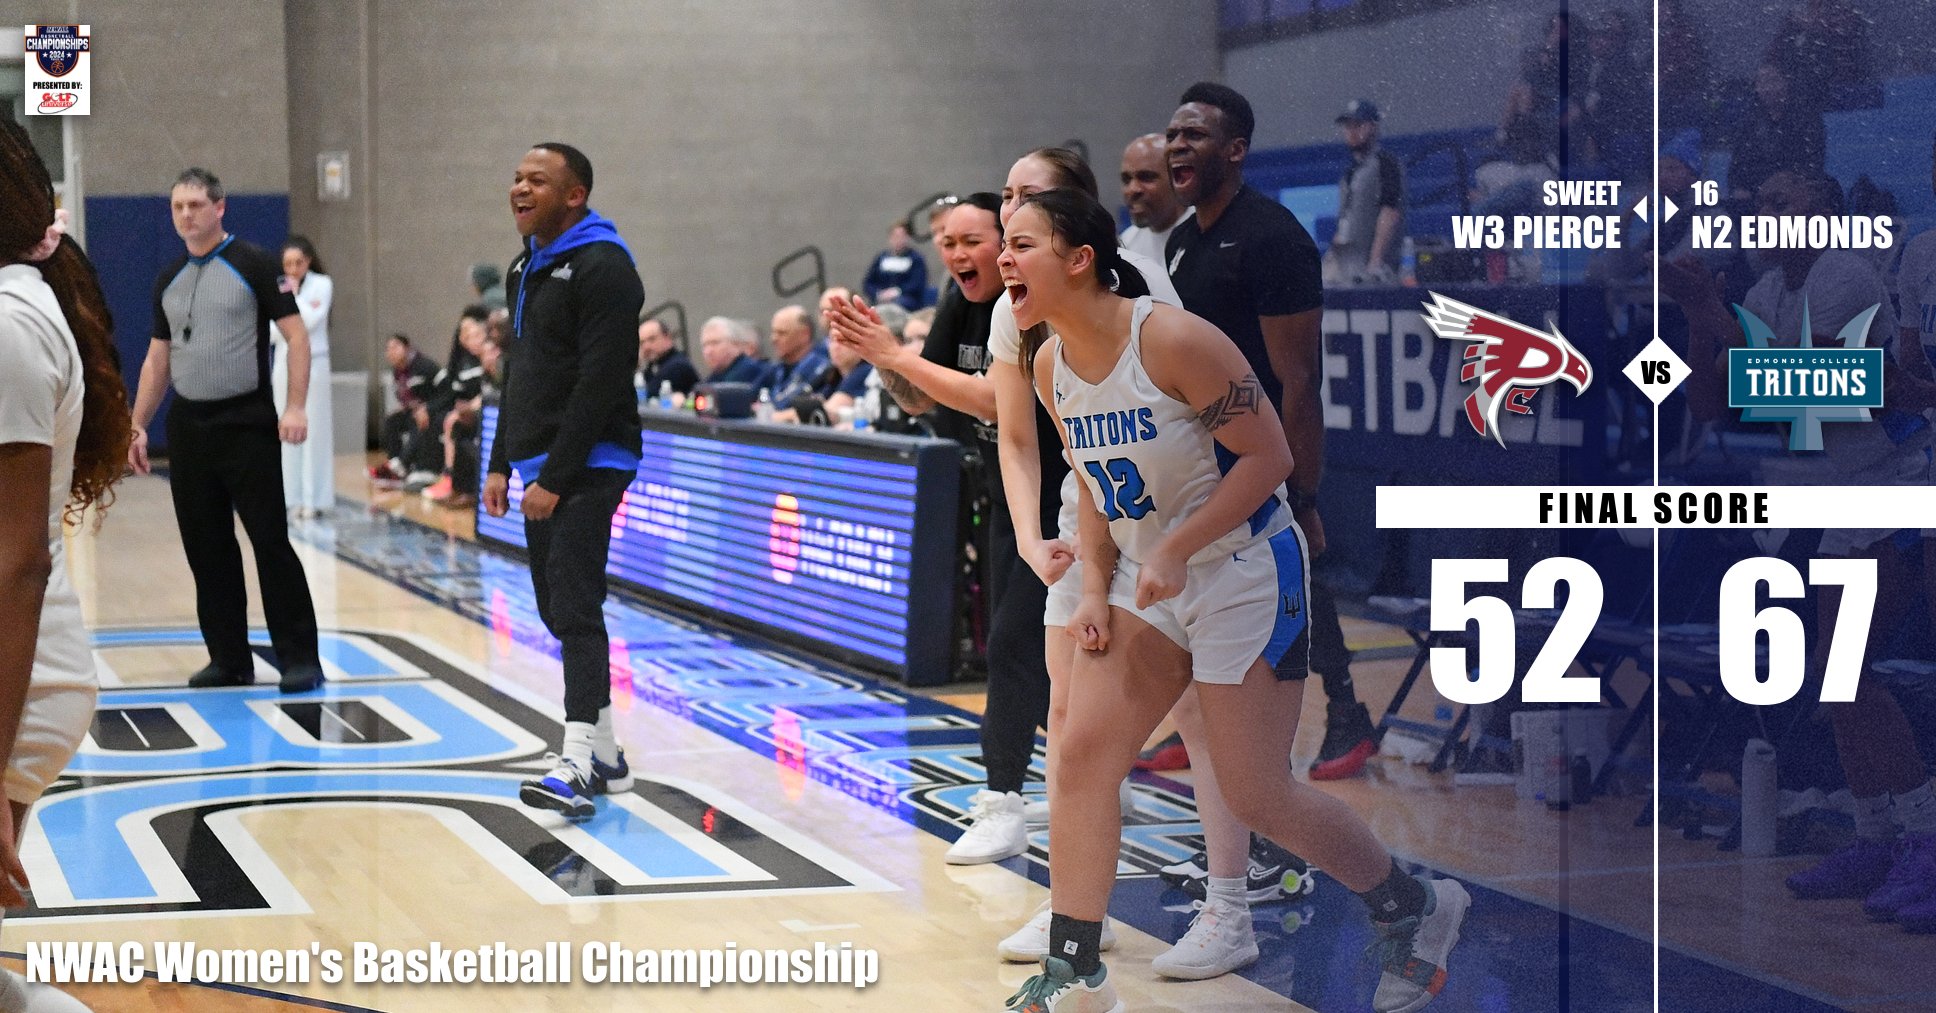 Tritons Never Trail in 67-52 Victory over Pierce to Advance to Elite 8